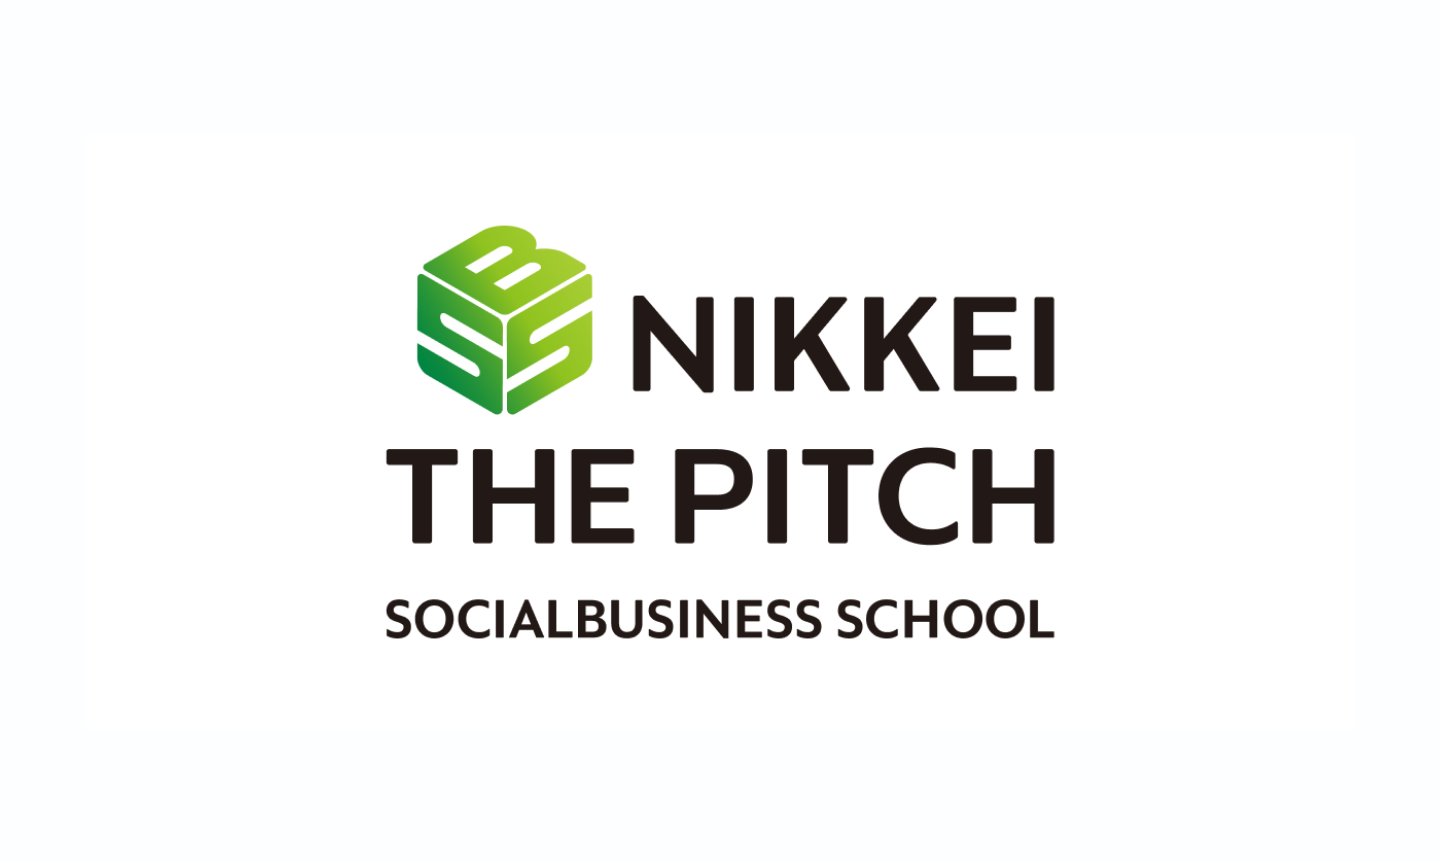 NIKKEI THE PITCH SOCIALBUSINESS SCHOOL